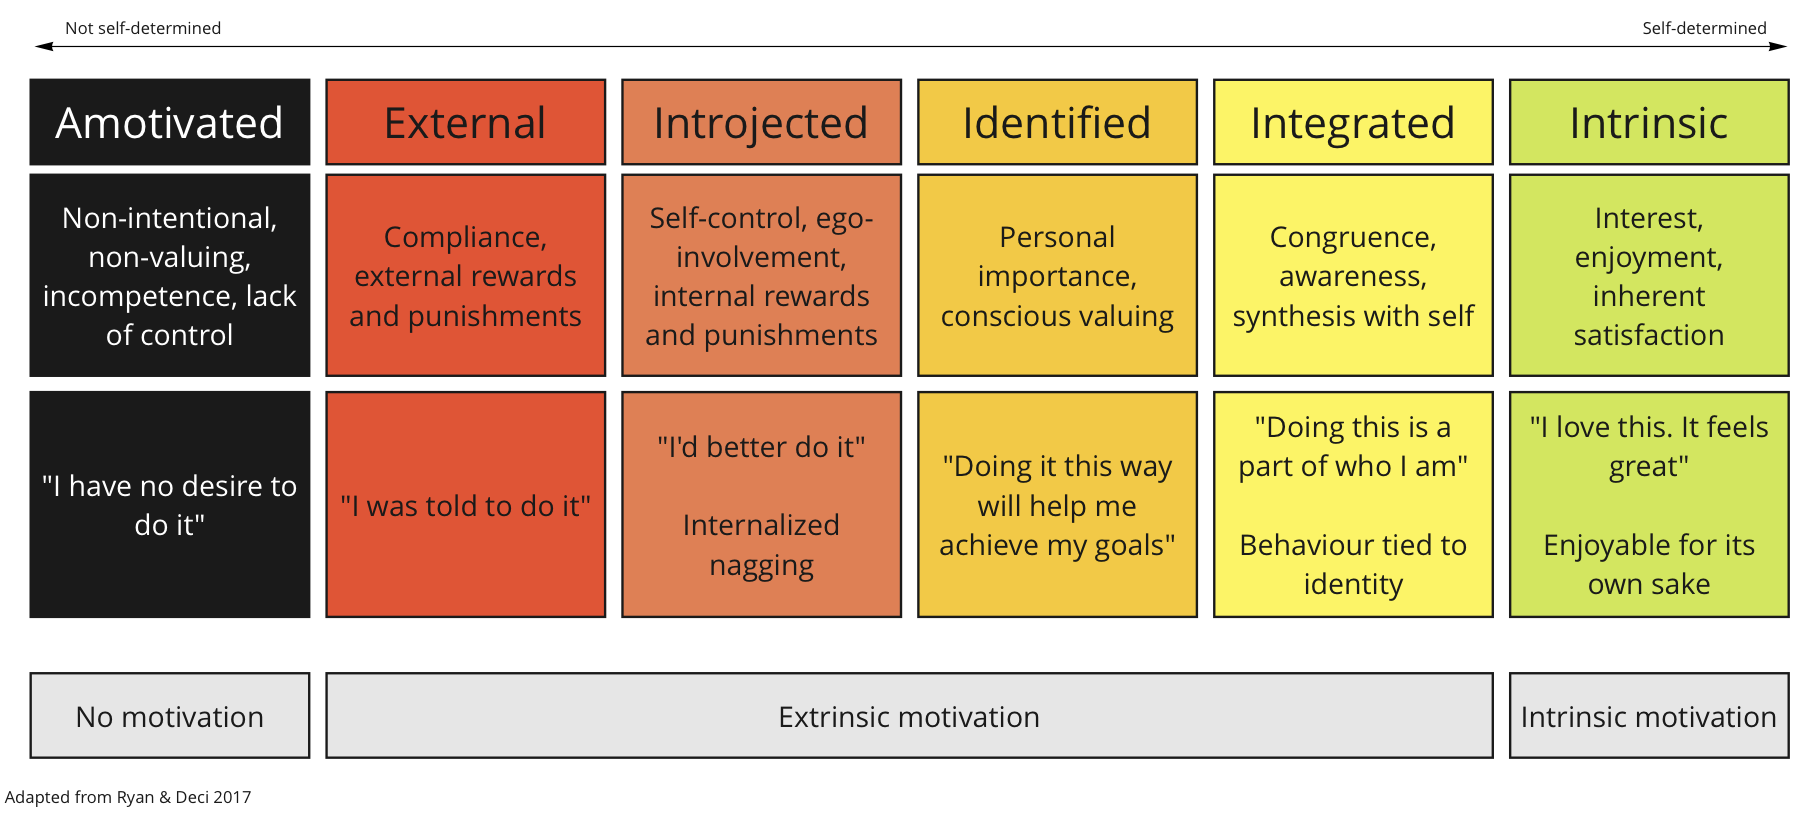 Motivation as defined by Self-Determination Theory, with Amotivated on the far left and Intrinsic on the far right.